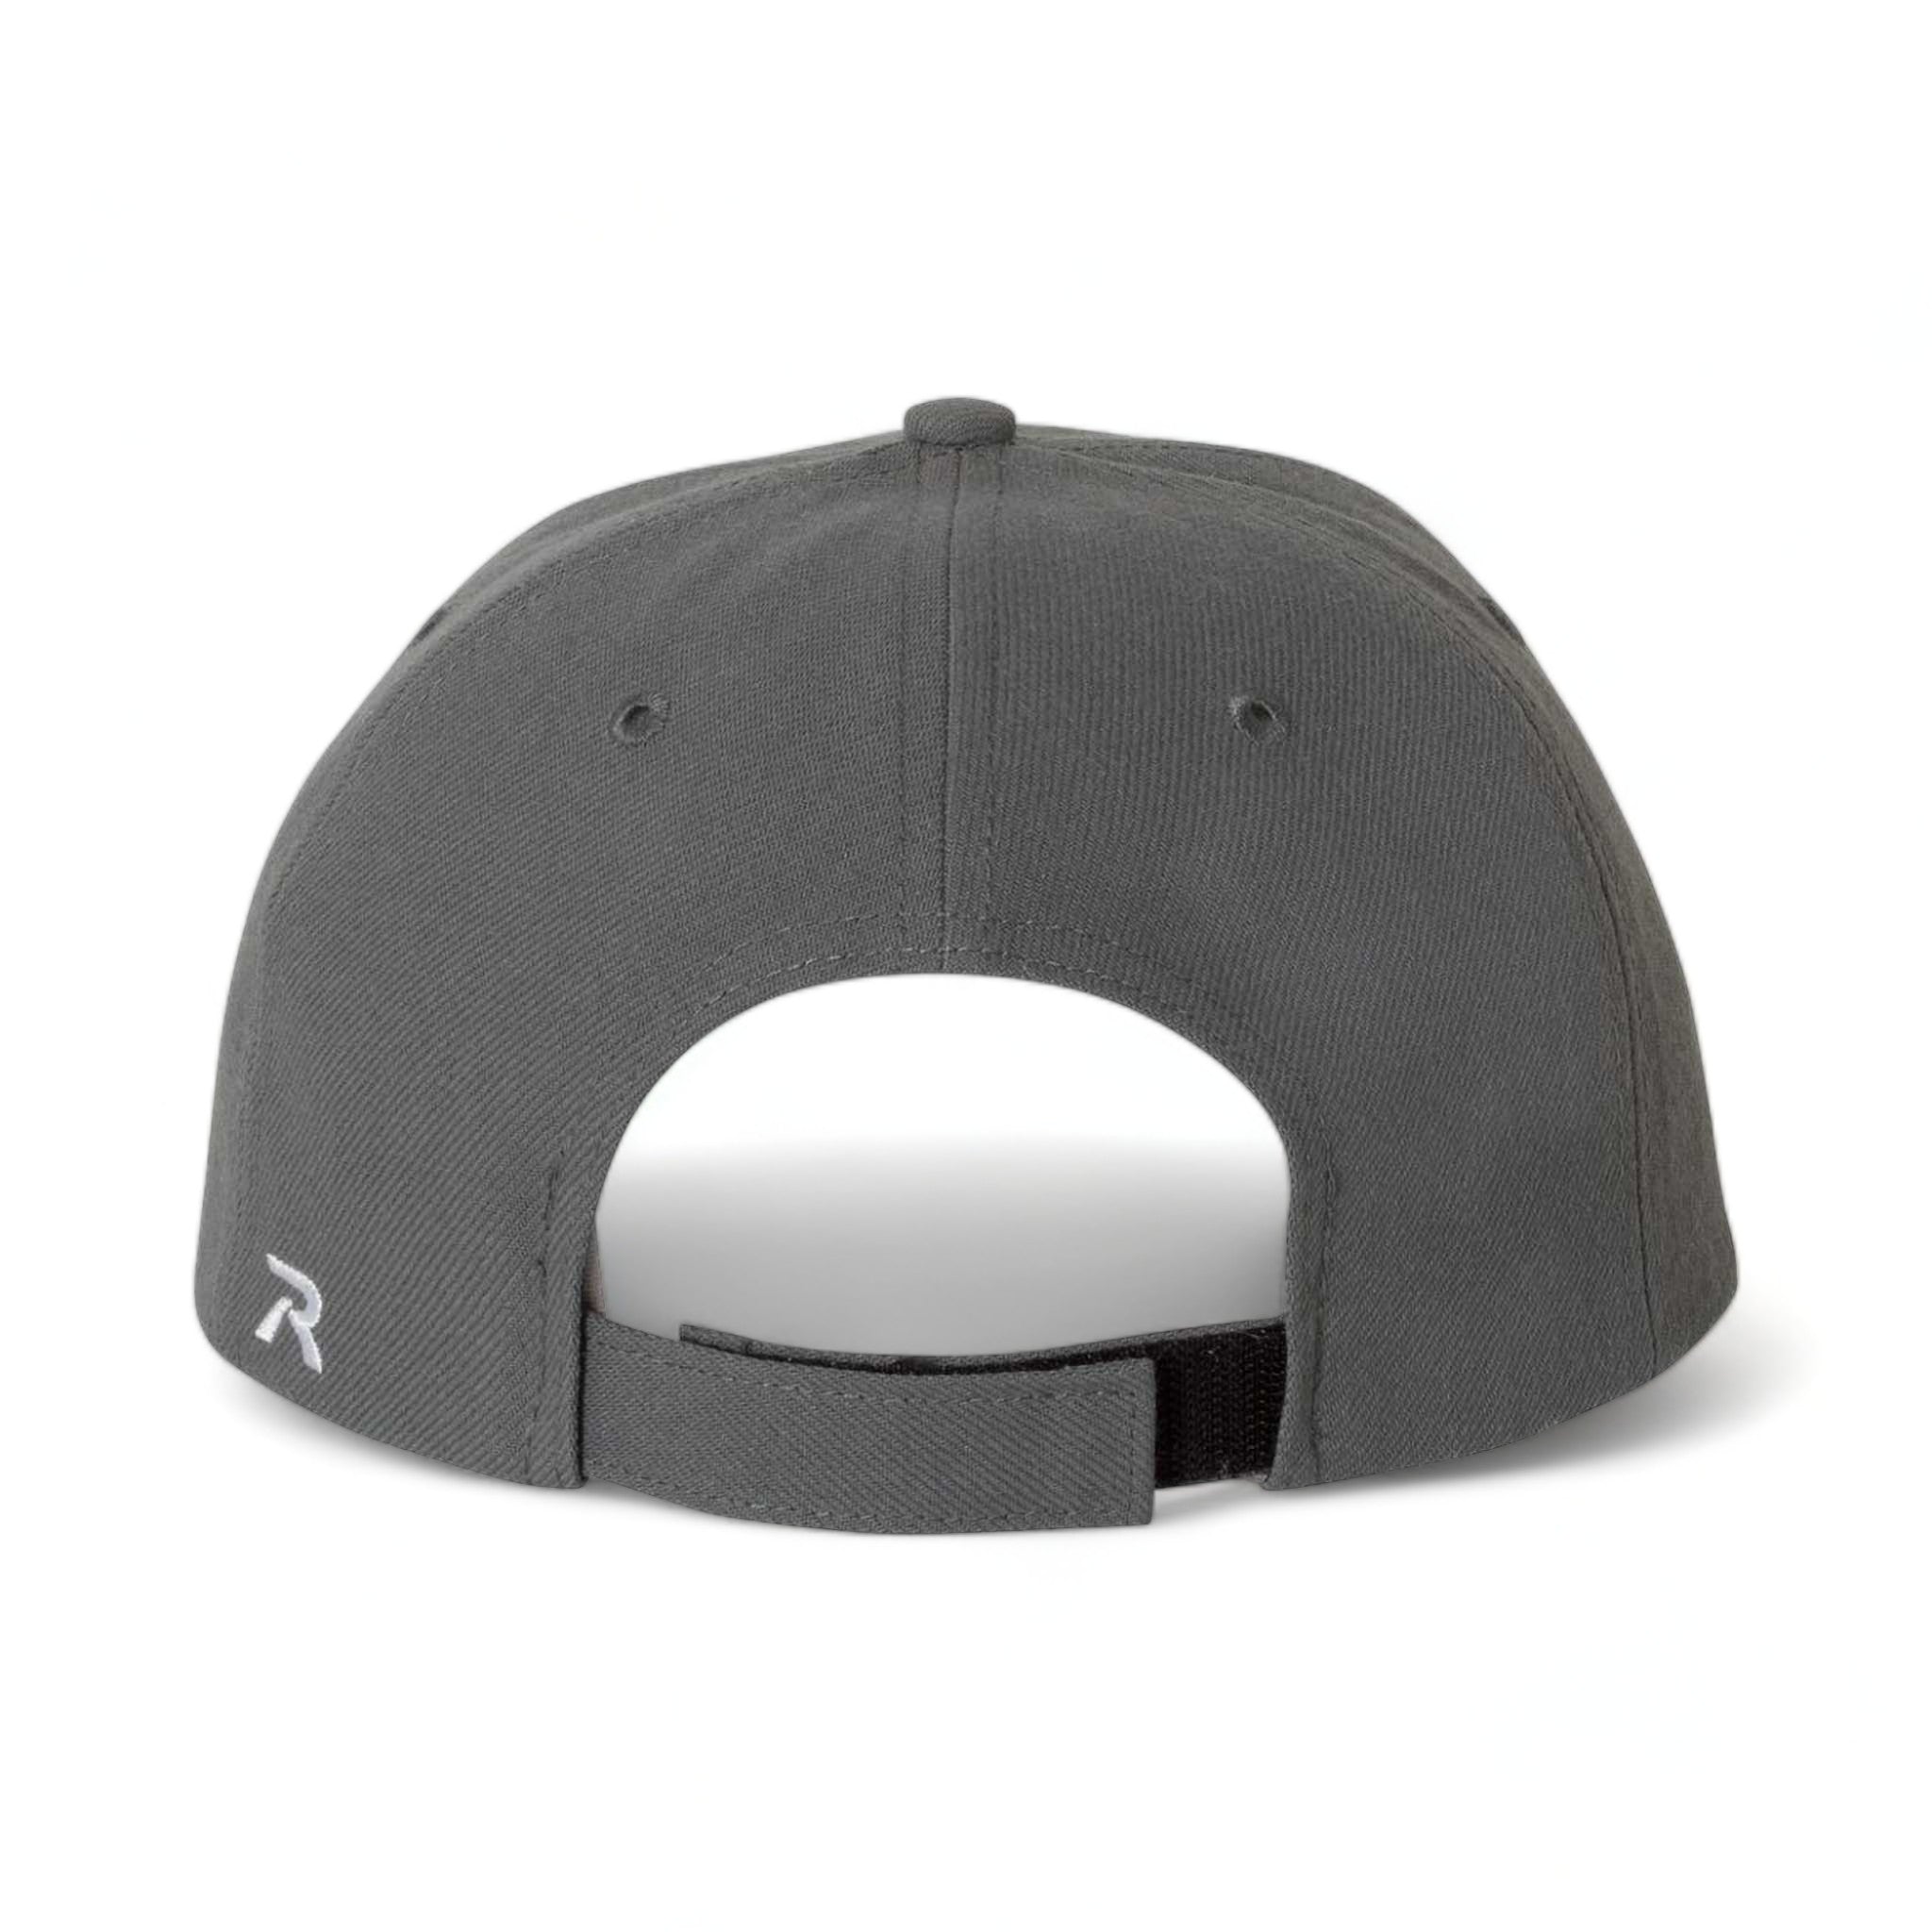 Back view of Richardson 514 custom hat in charcoal